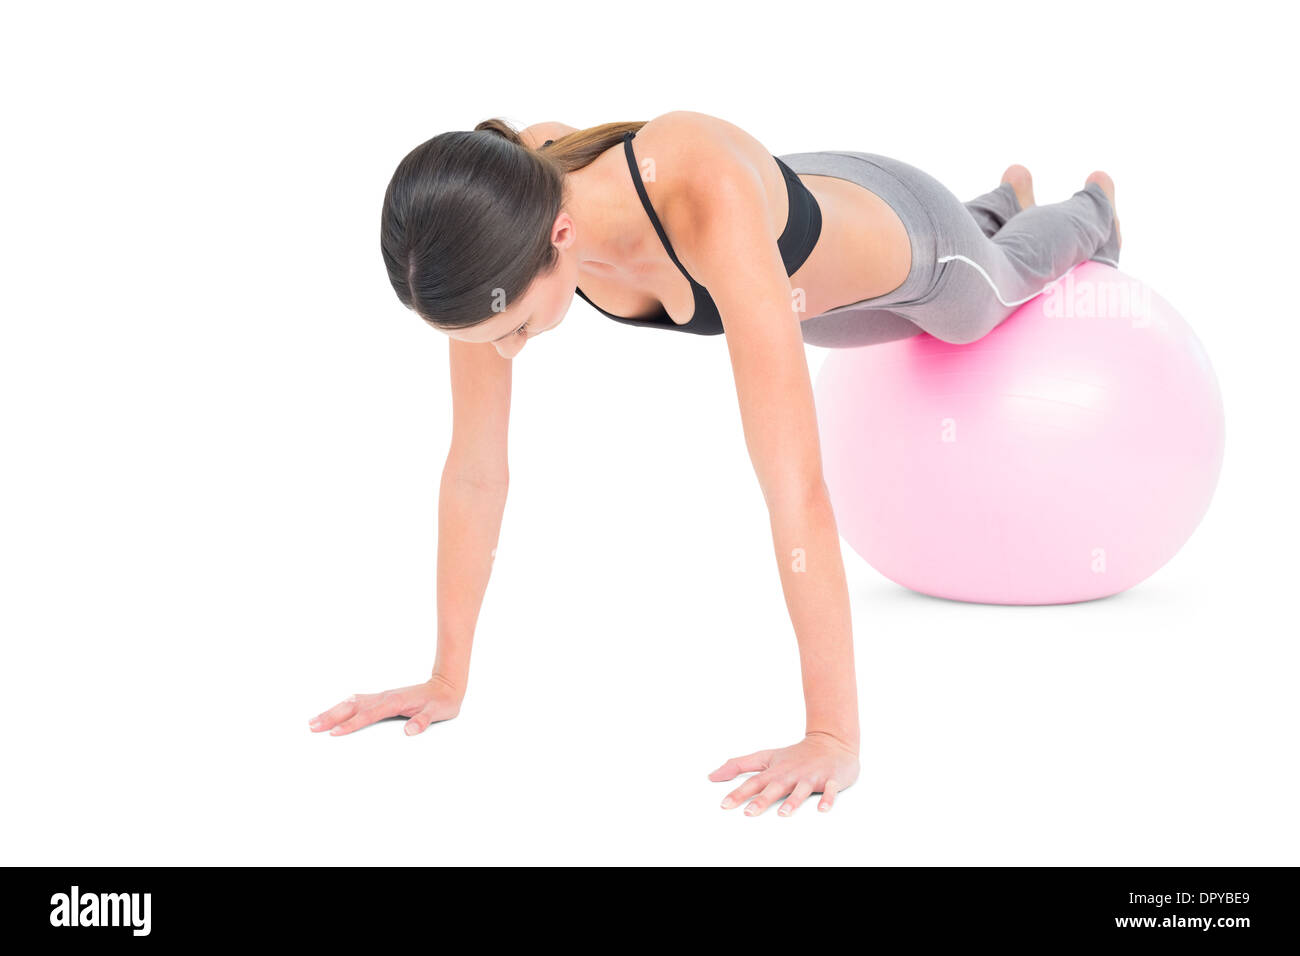 Fit woman doing push ups on fitness ball Stock Photo